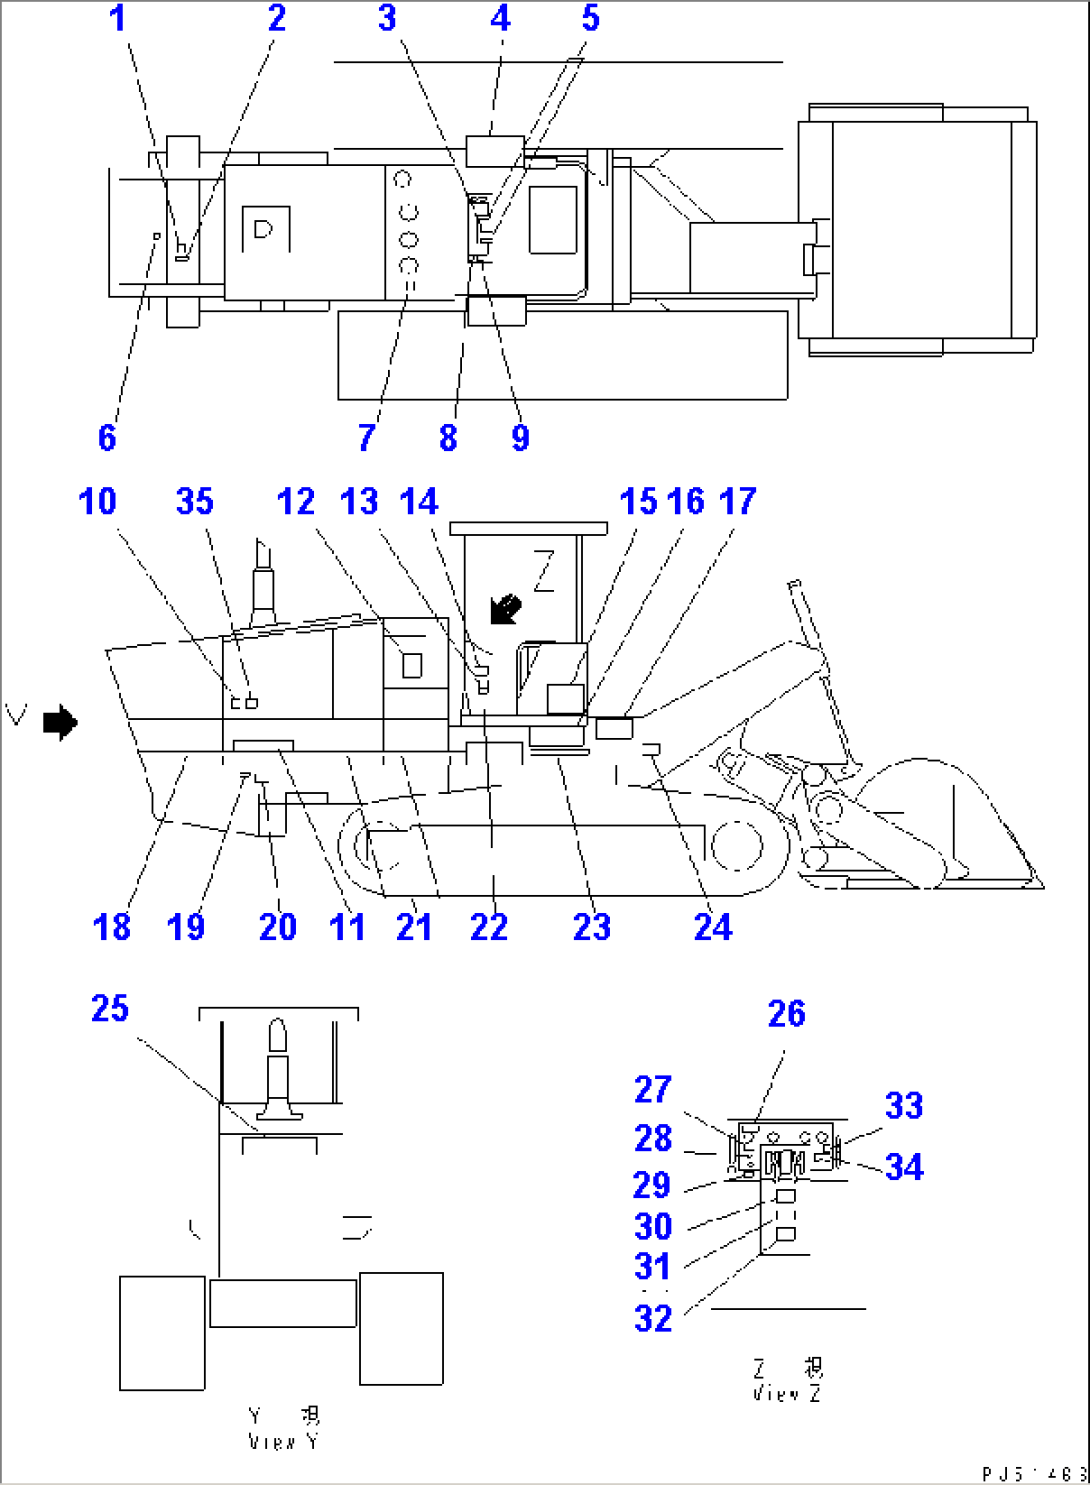 MARKS AND PLATES (GERMANY)(#11062-11062)